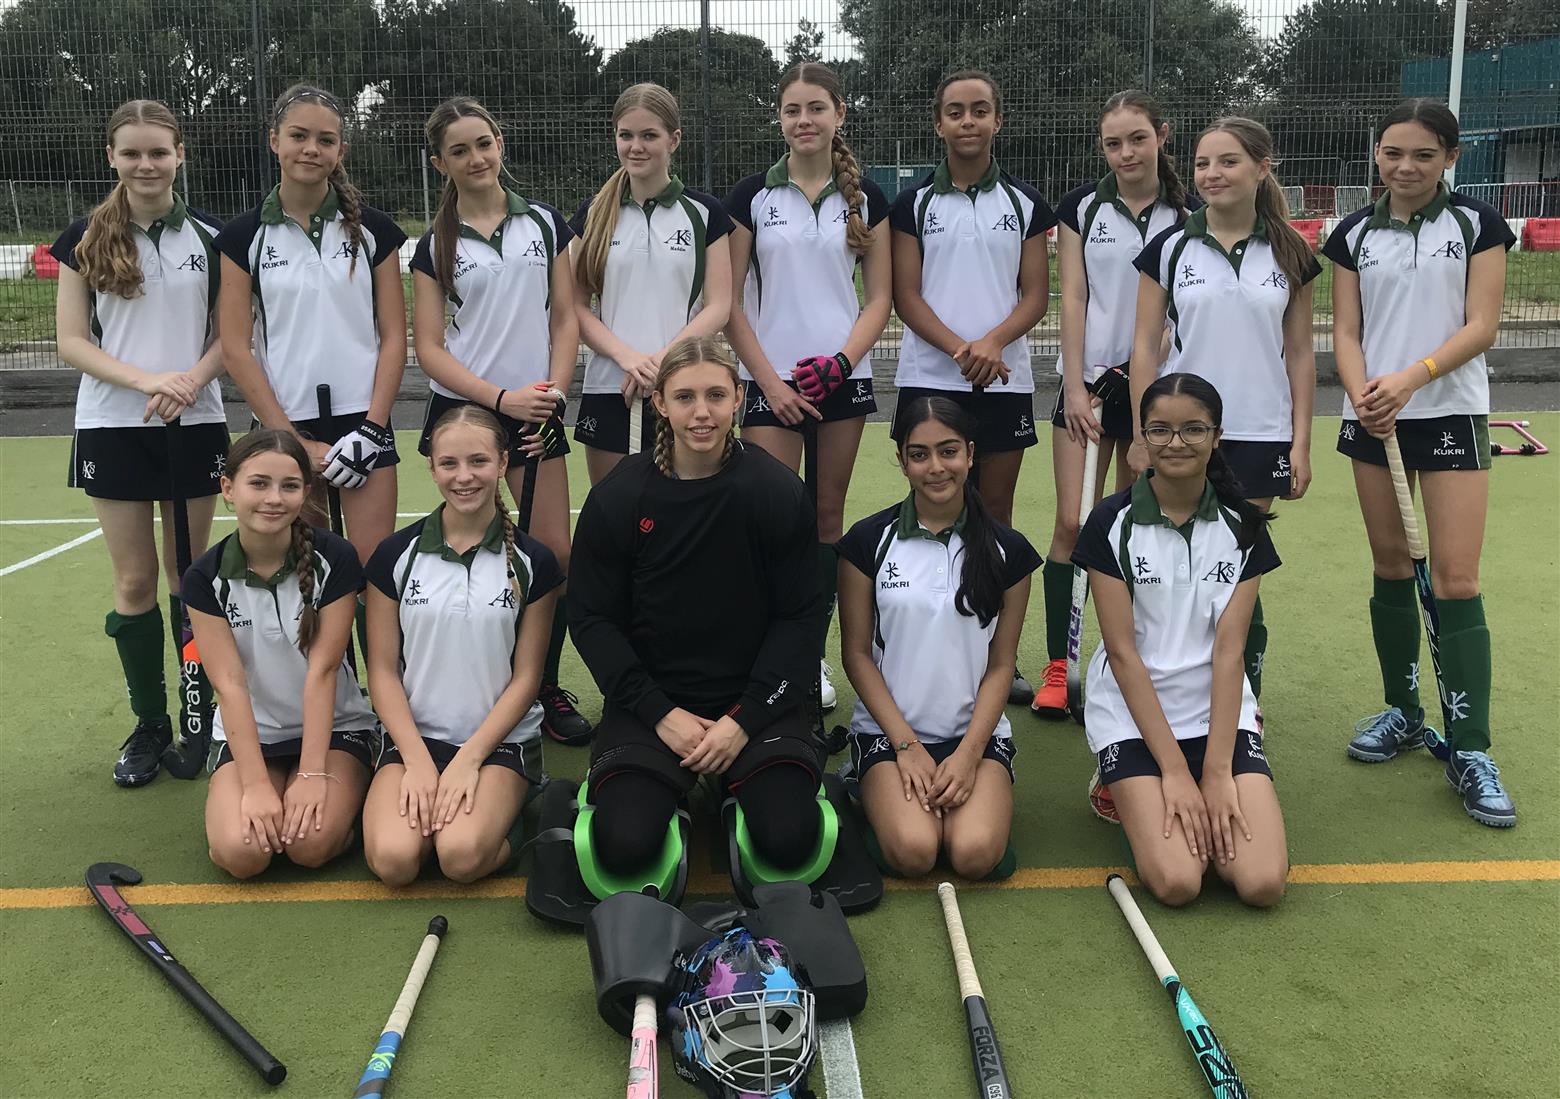 Superb start to hockey season with six teams playing against Kings School, Macclesfield